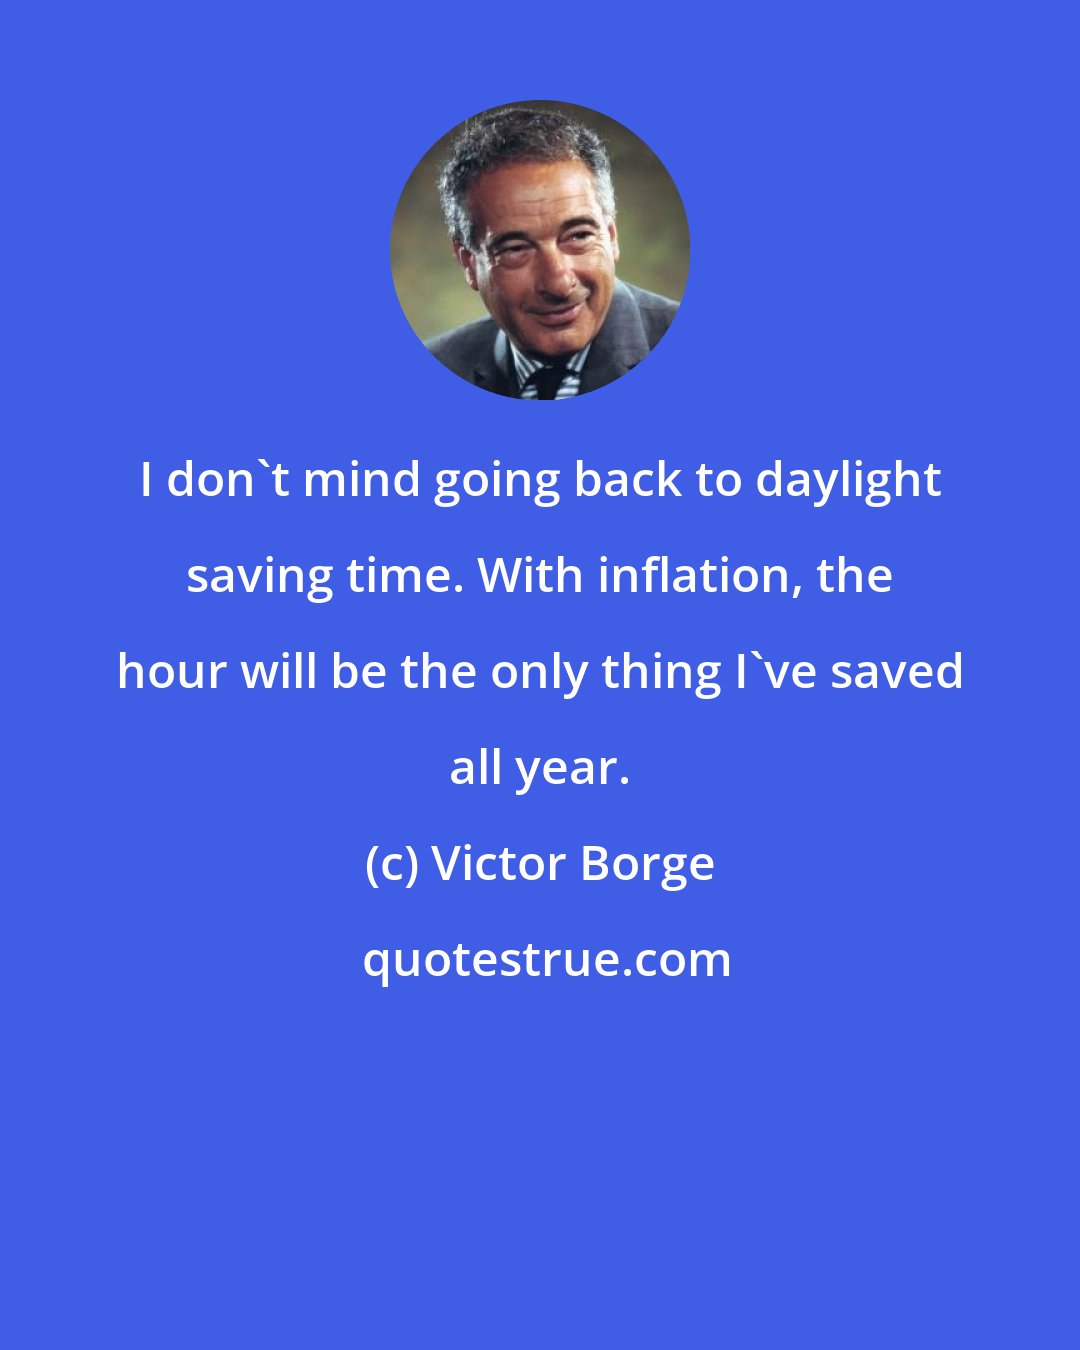 Victor Borge: I don't mind going back to daylight saving time. With inflation, the hour will be the only thing I've saved all year.